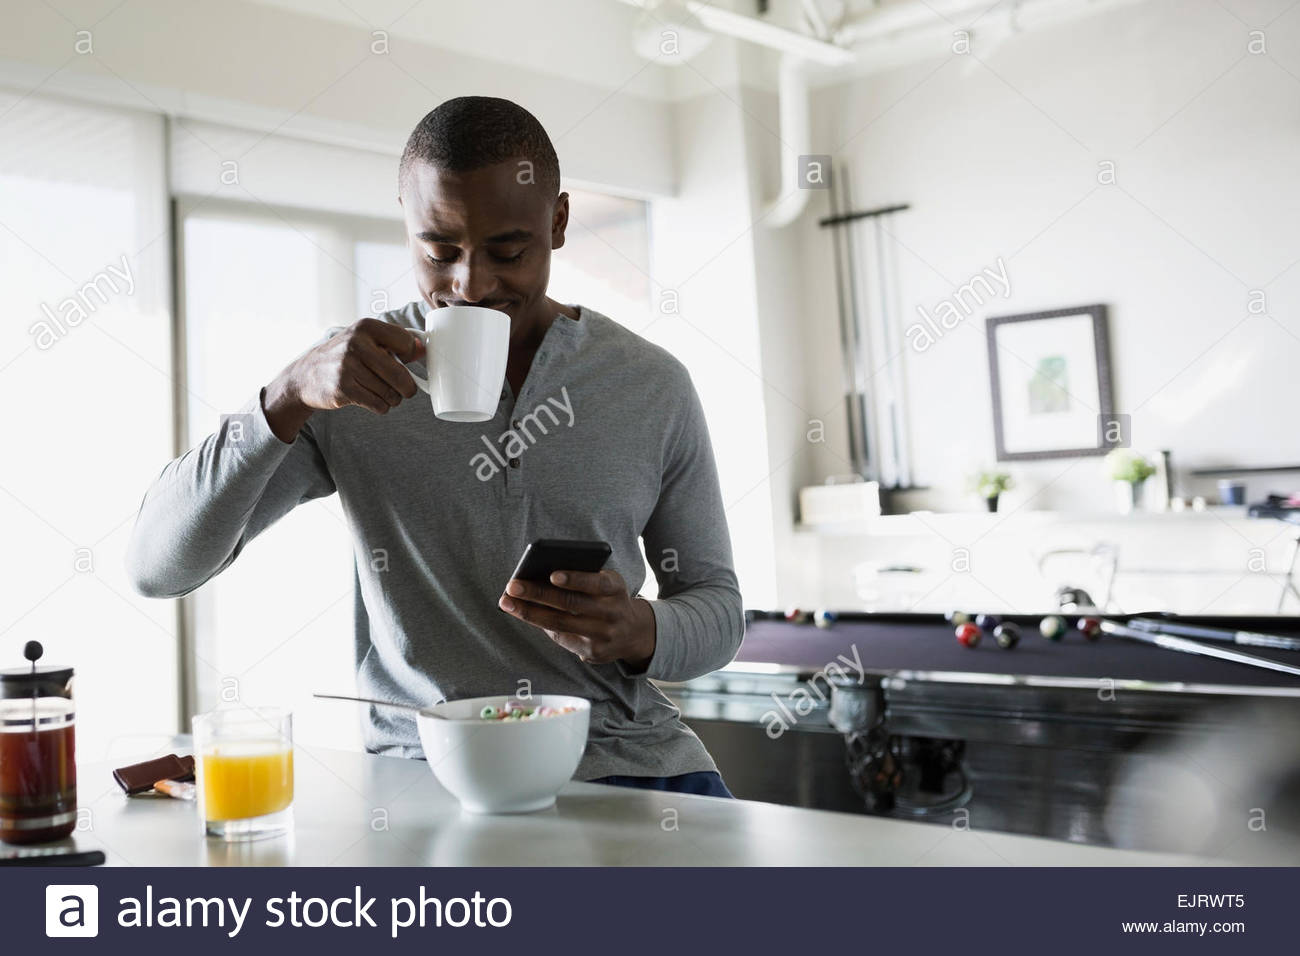 Man sipping morning coffee and texting in kitchen Stock Photo